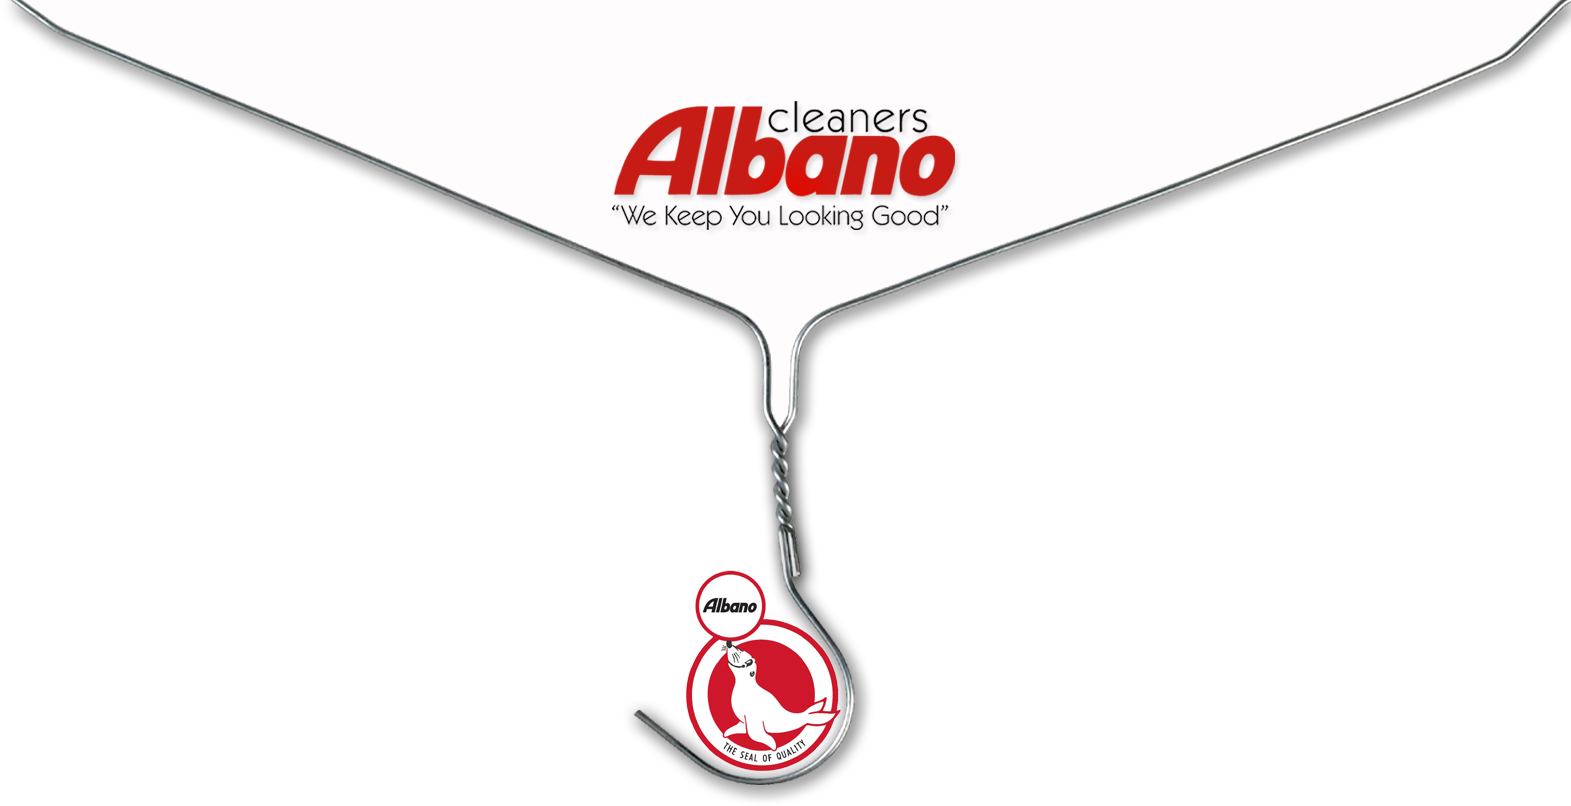 Albano Cleaners, 'We Keep You Looking Good'